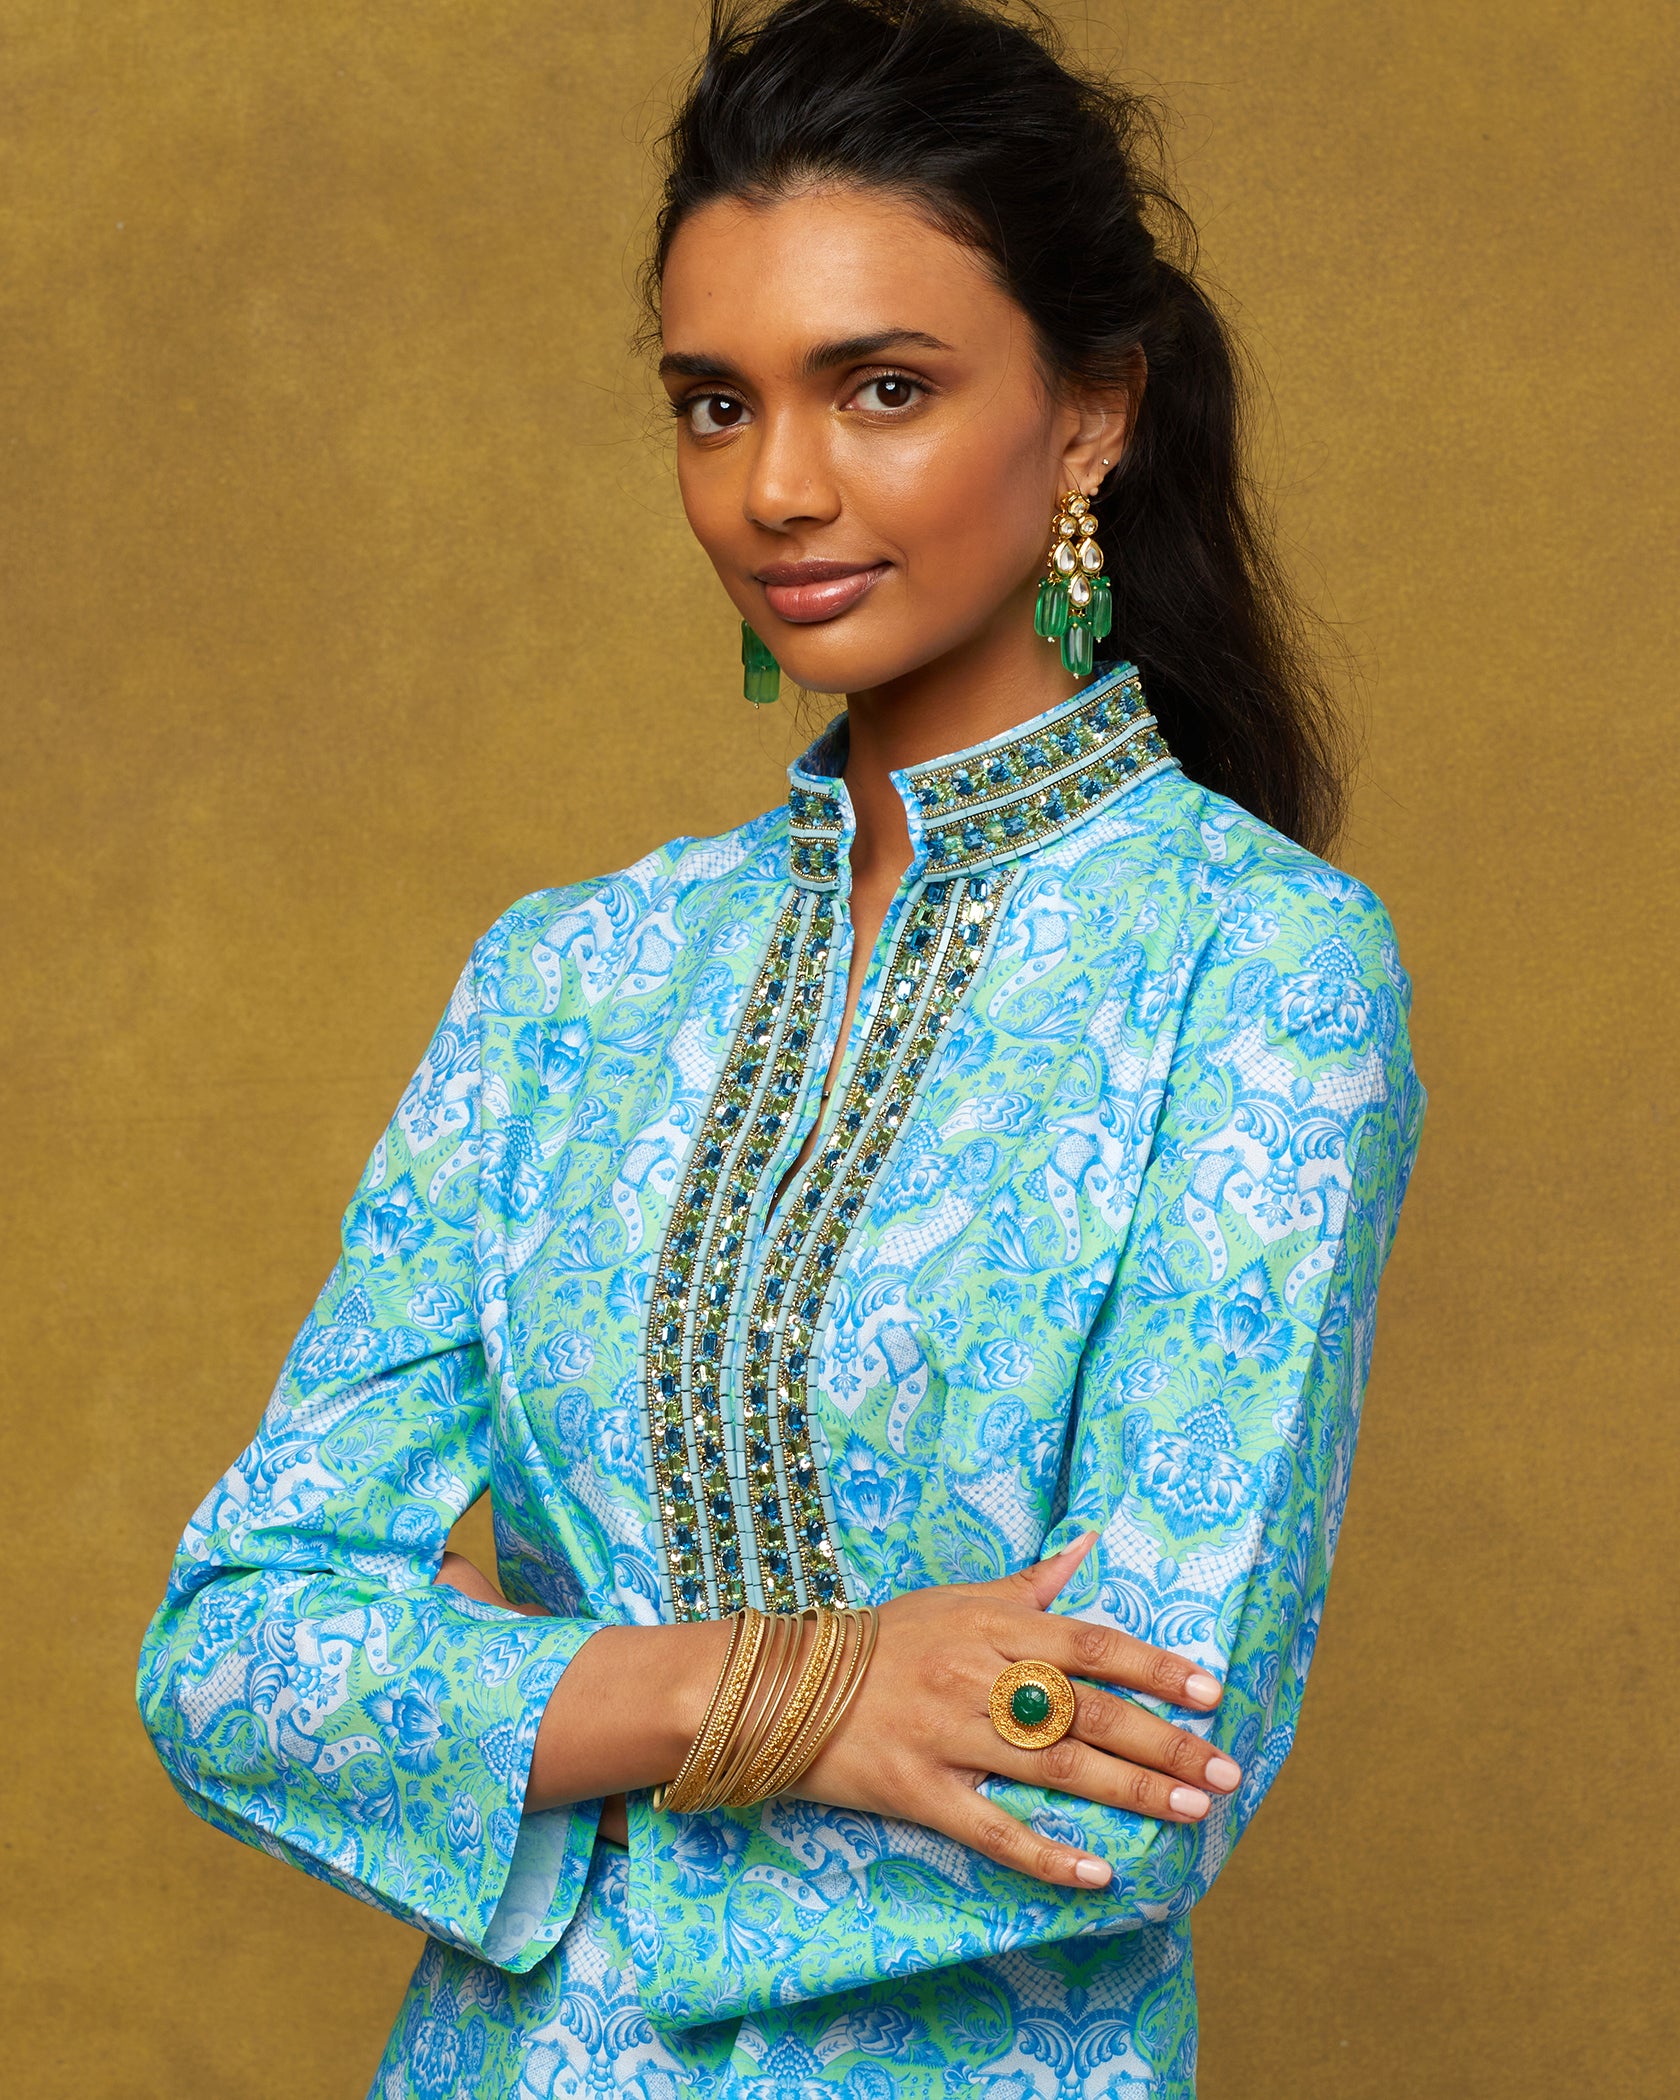 Shalimar Tunic in Turquoise and Green and Topaz Crystal Embellishment